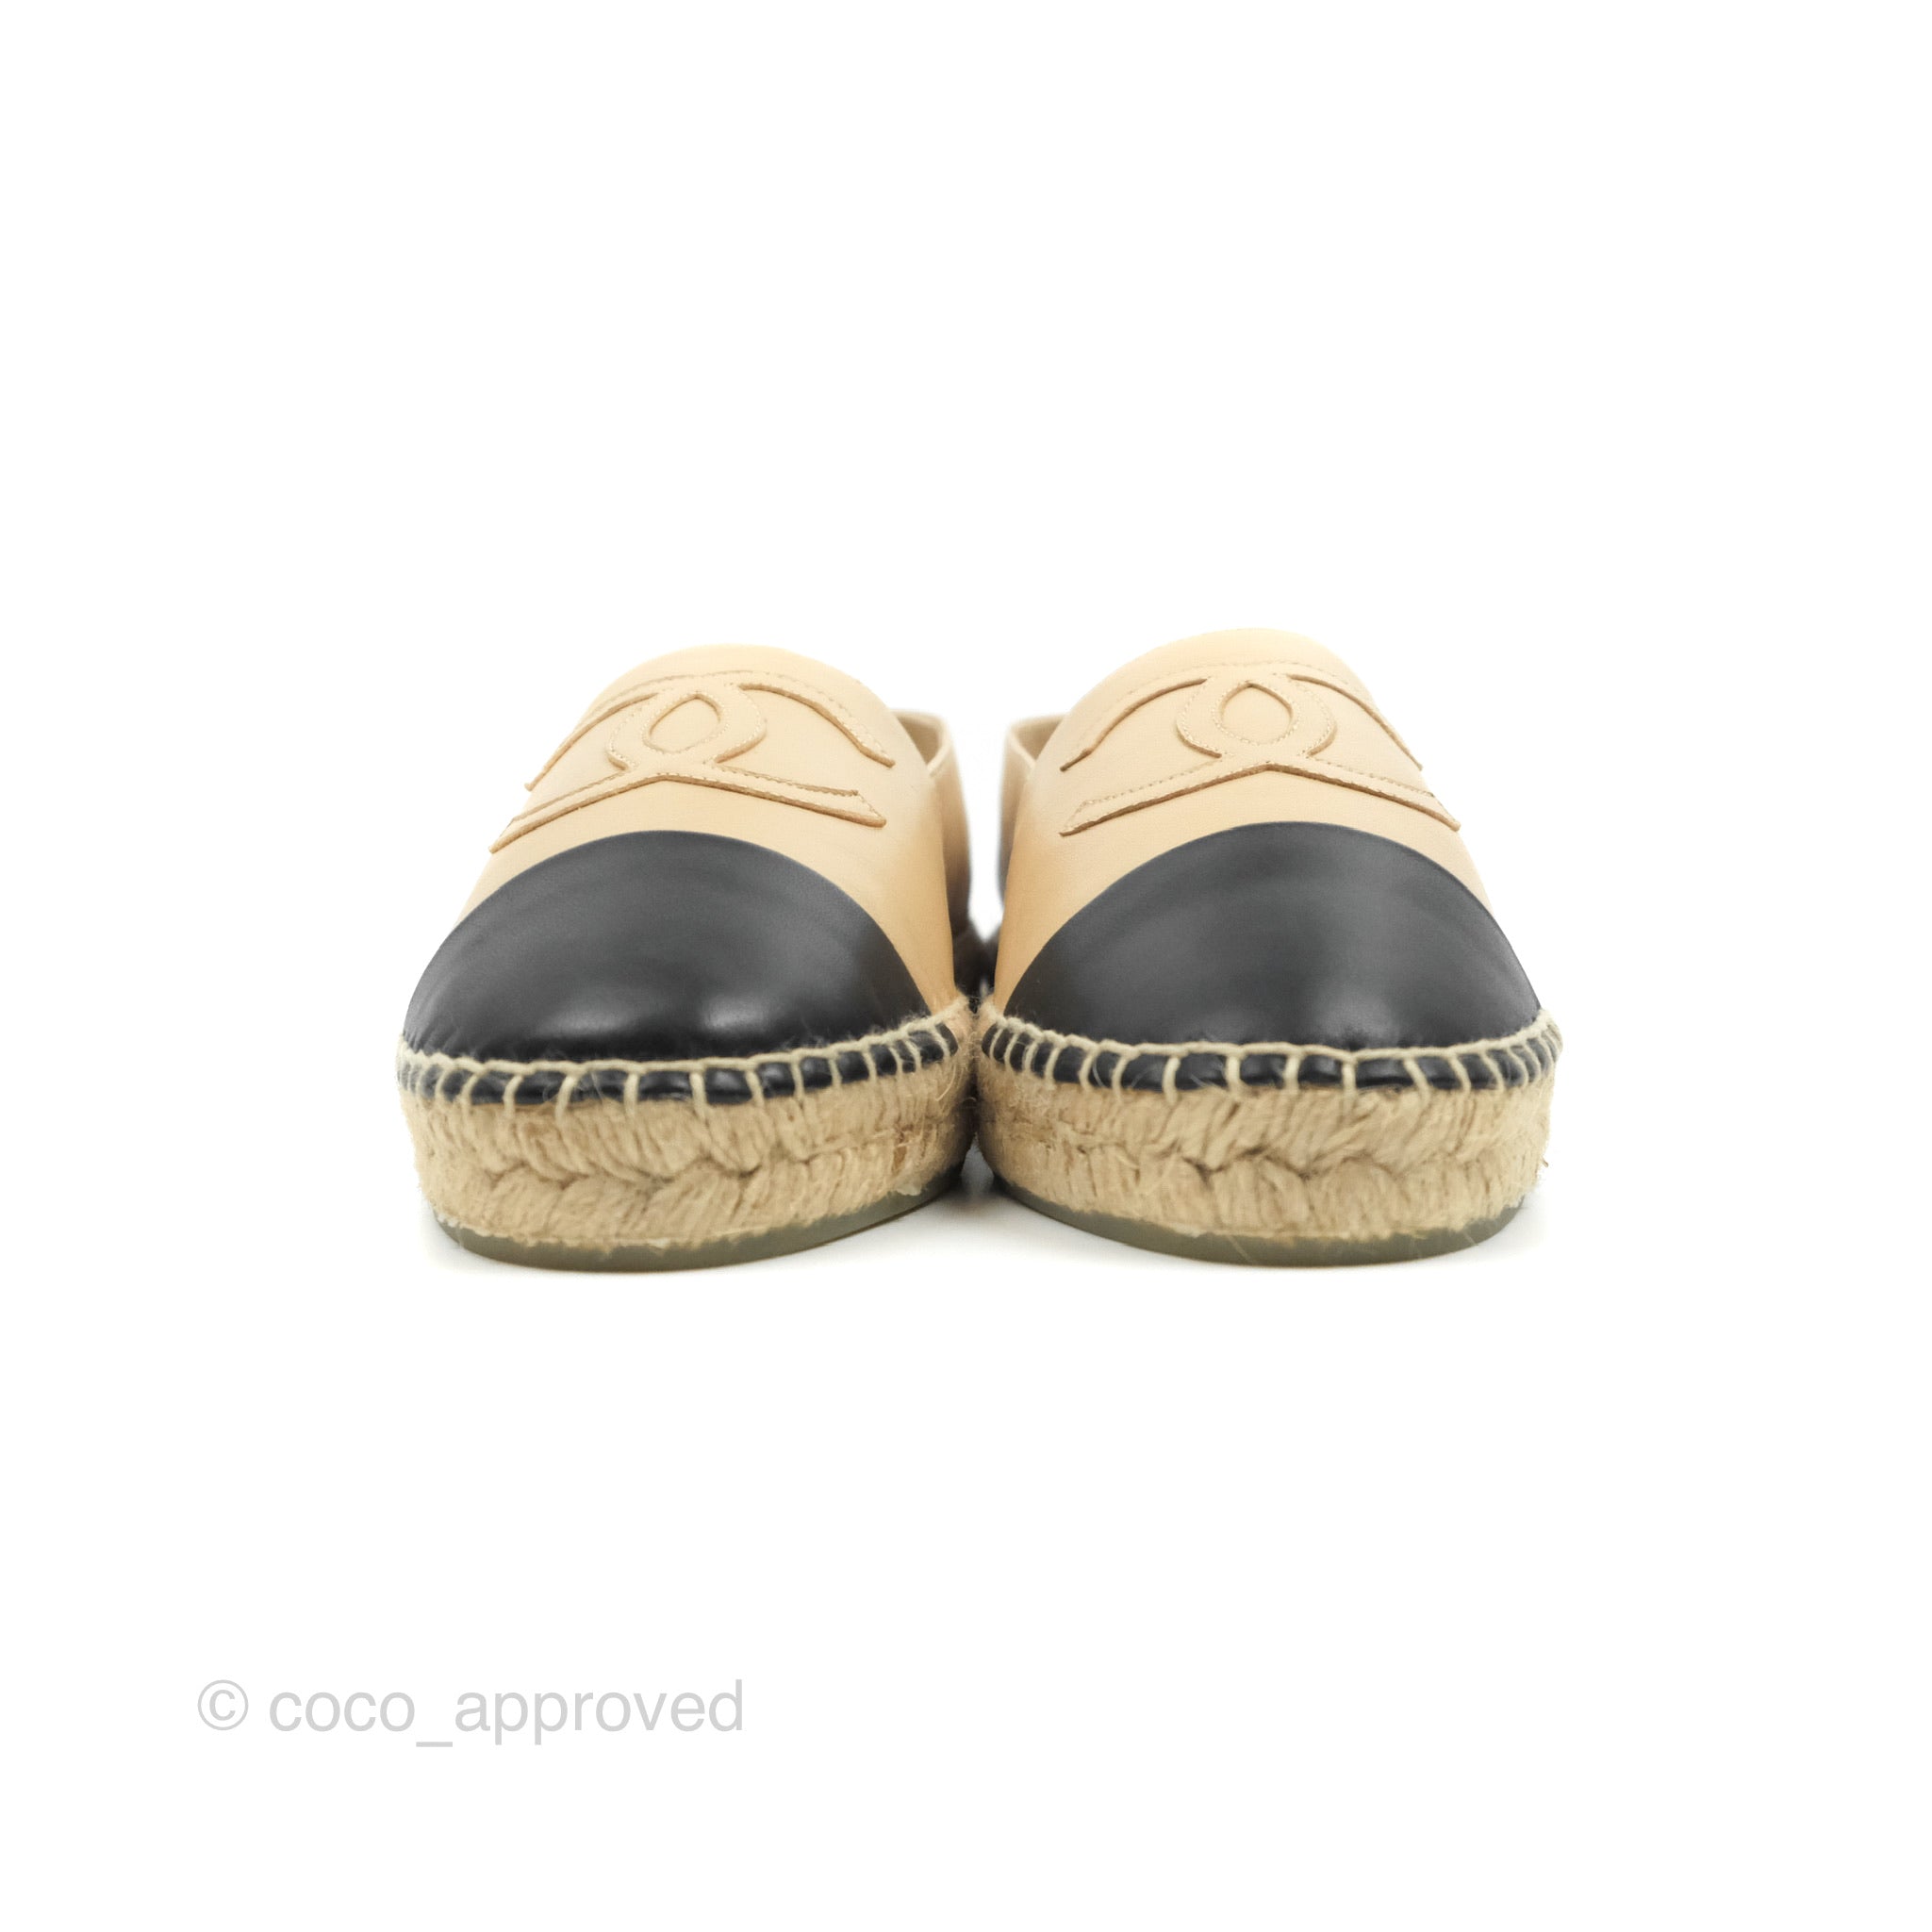 New in box Chanel Espadrilles Size 38 Lambskin shoes